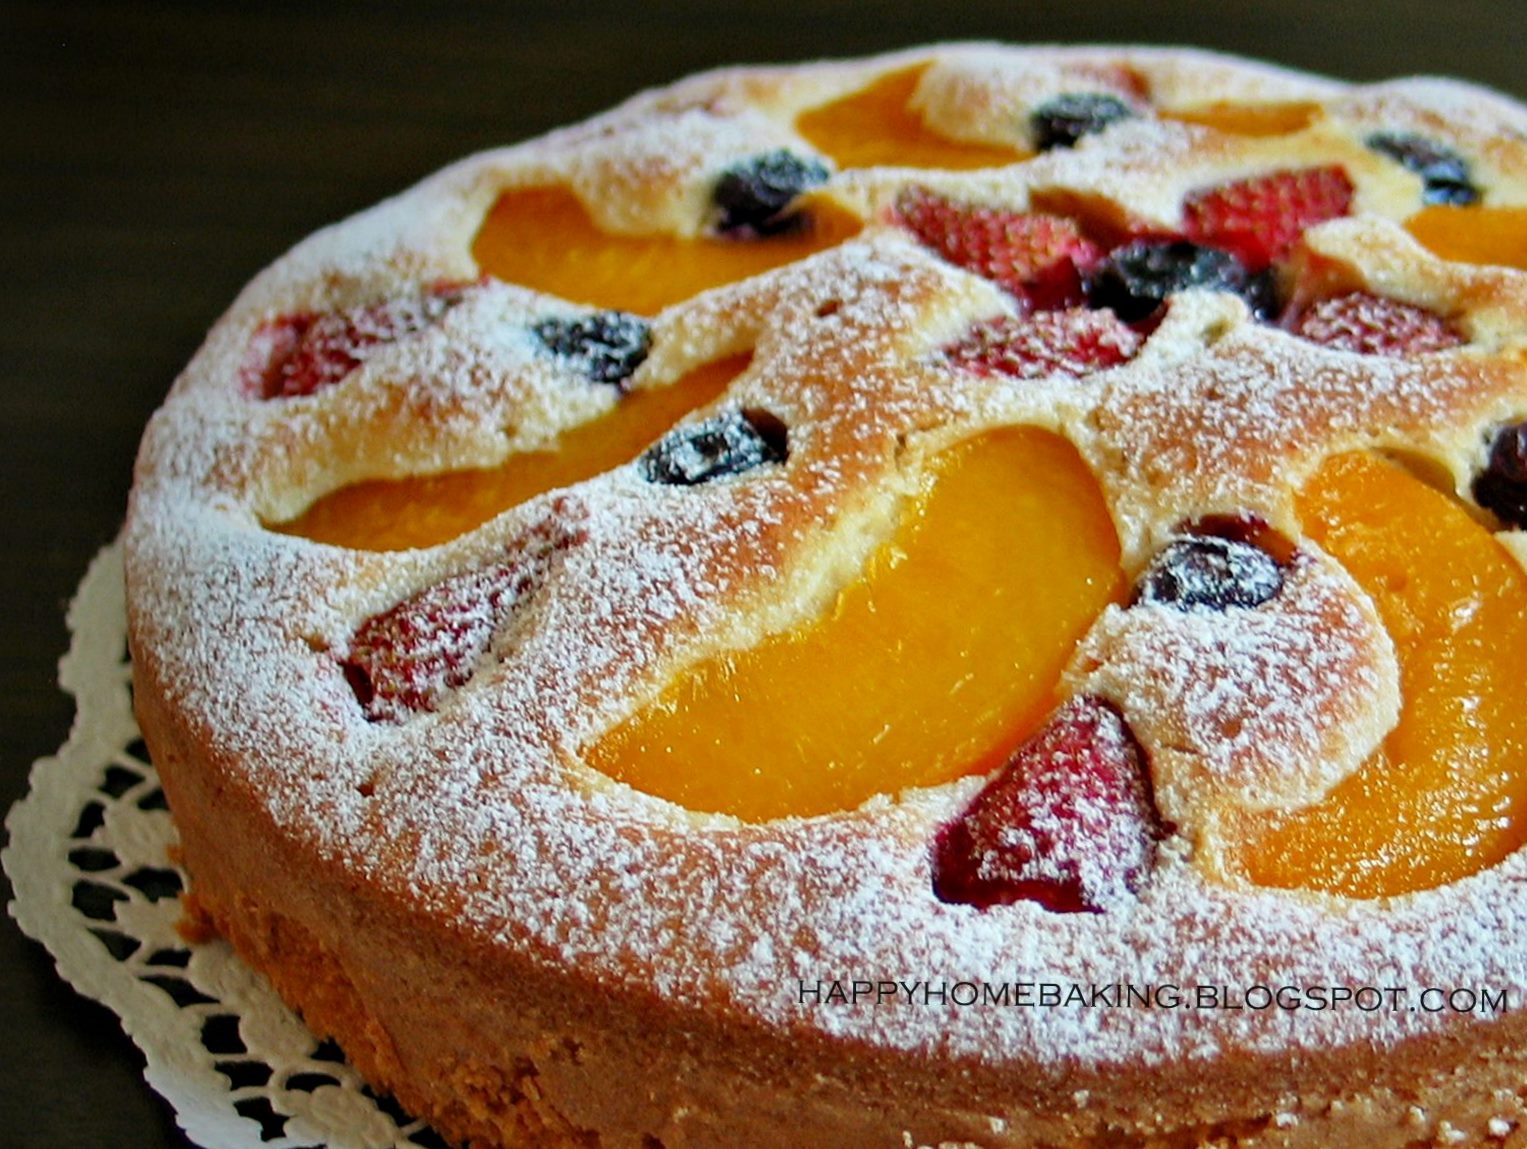 Happy Home Baking Fruit Pastry Cake